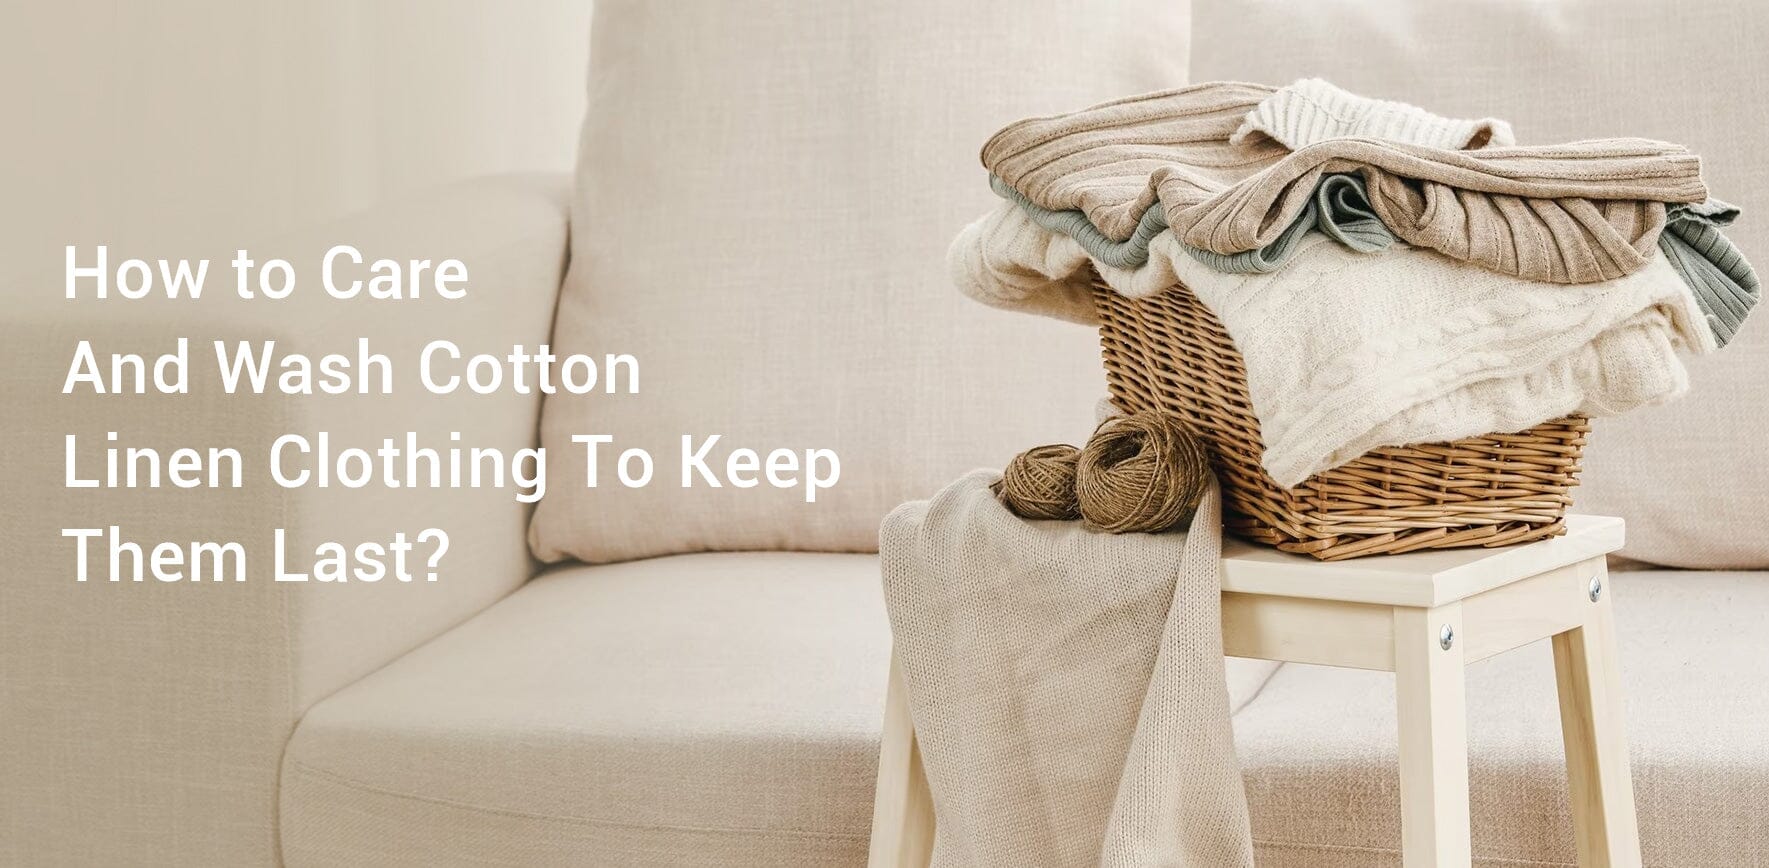 How to Wash and Care for Cotton Clothes